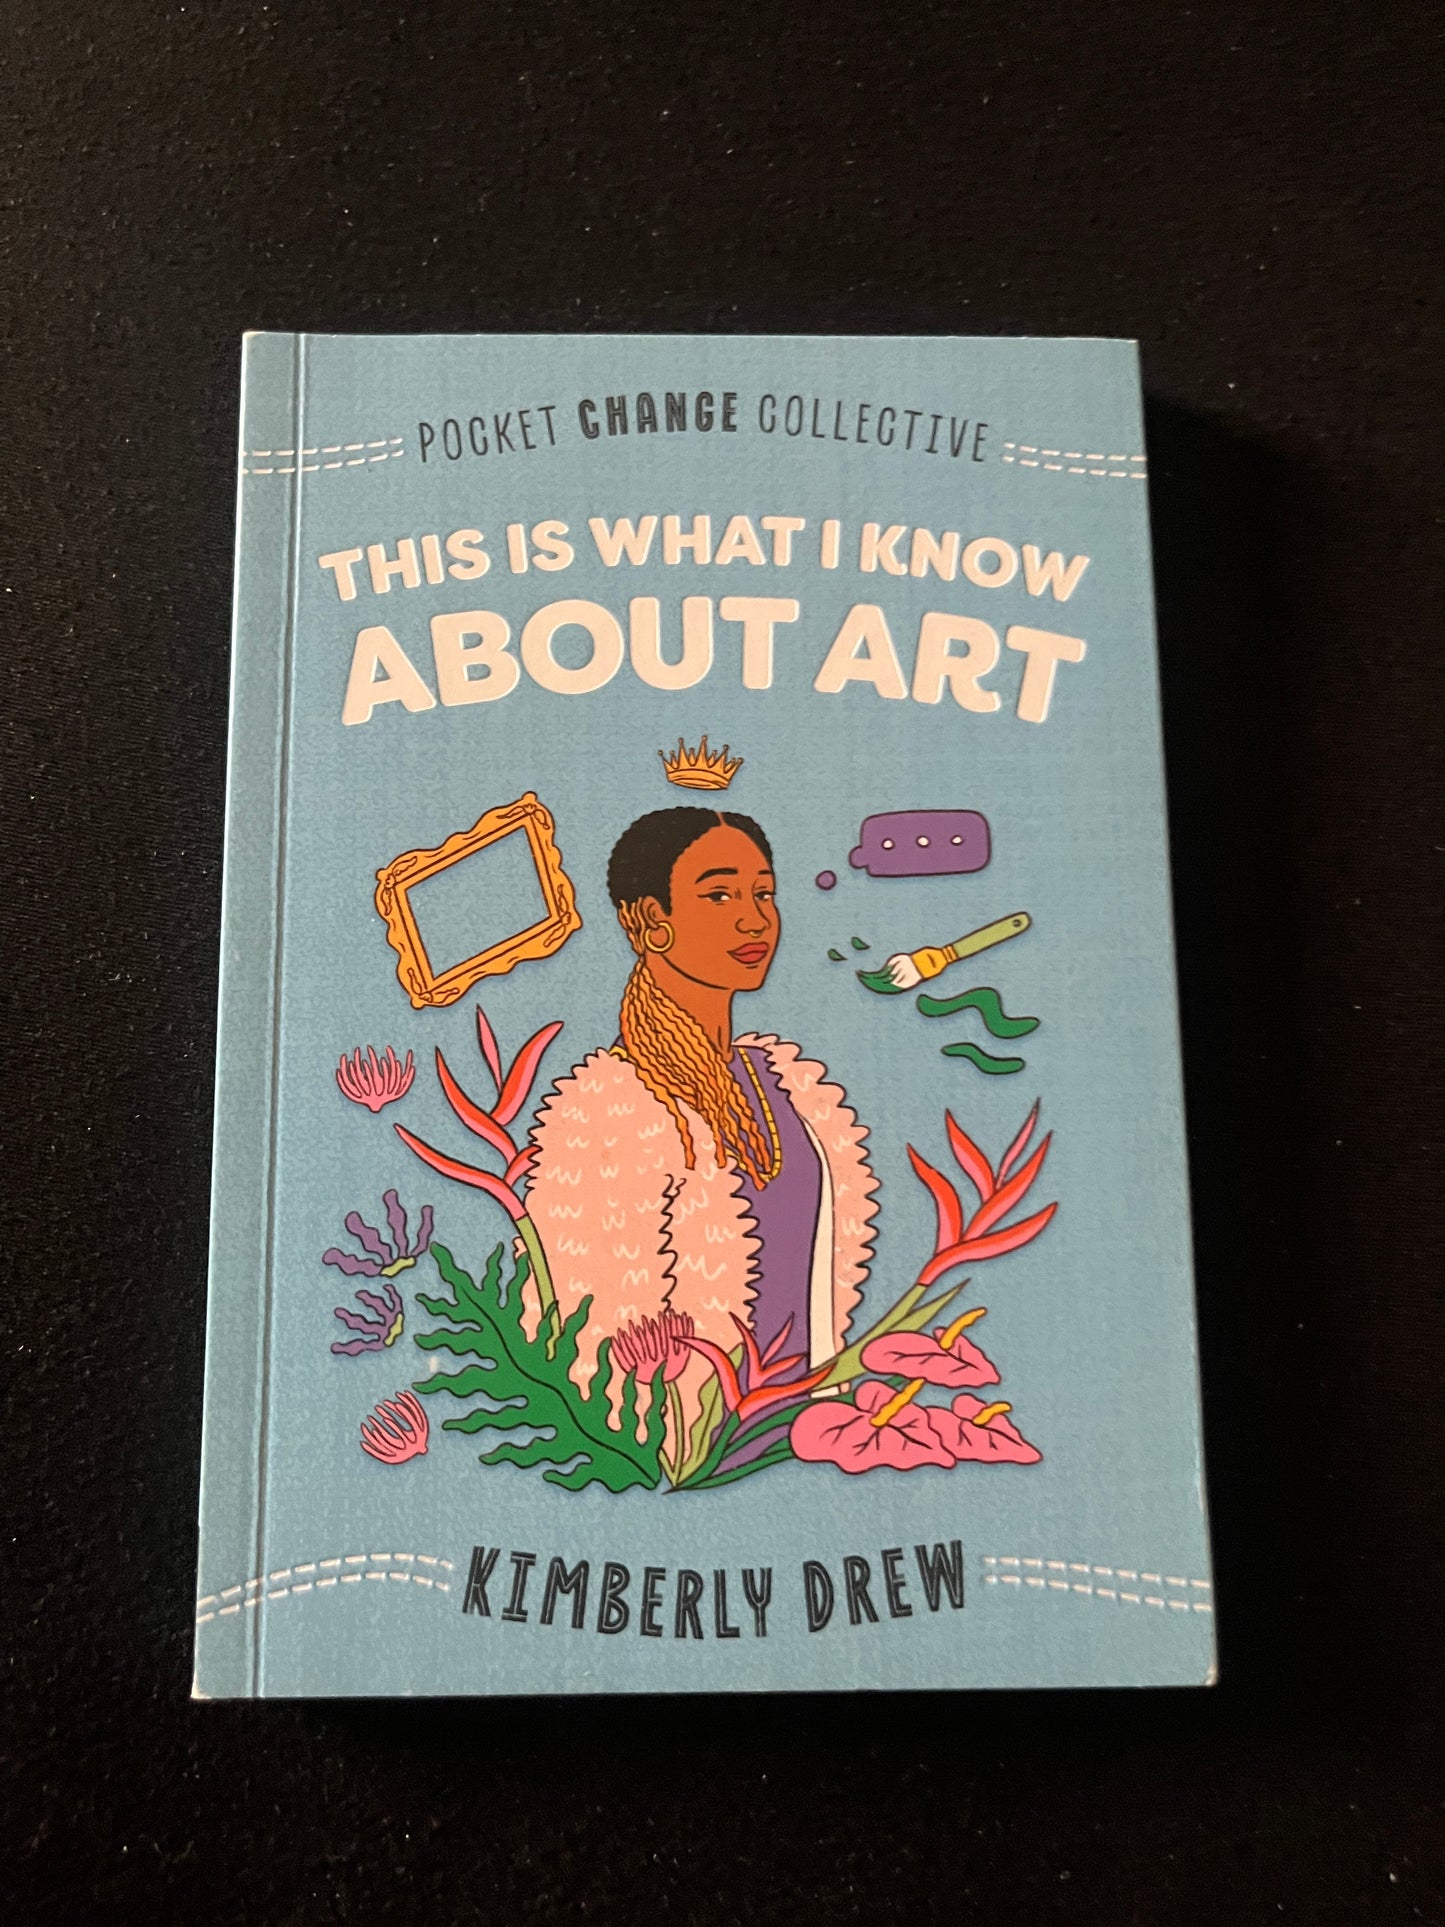 THIS IS WHAT I KNOW ABOUT ART by Kimberly Drew